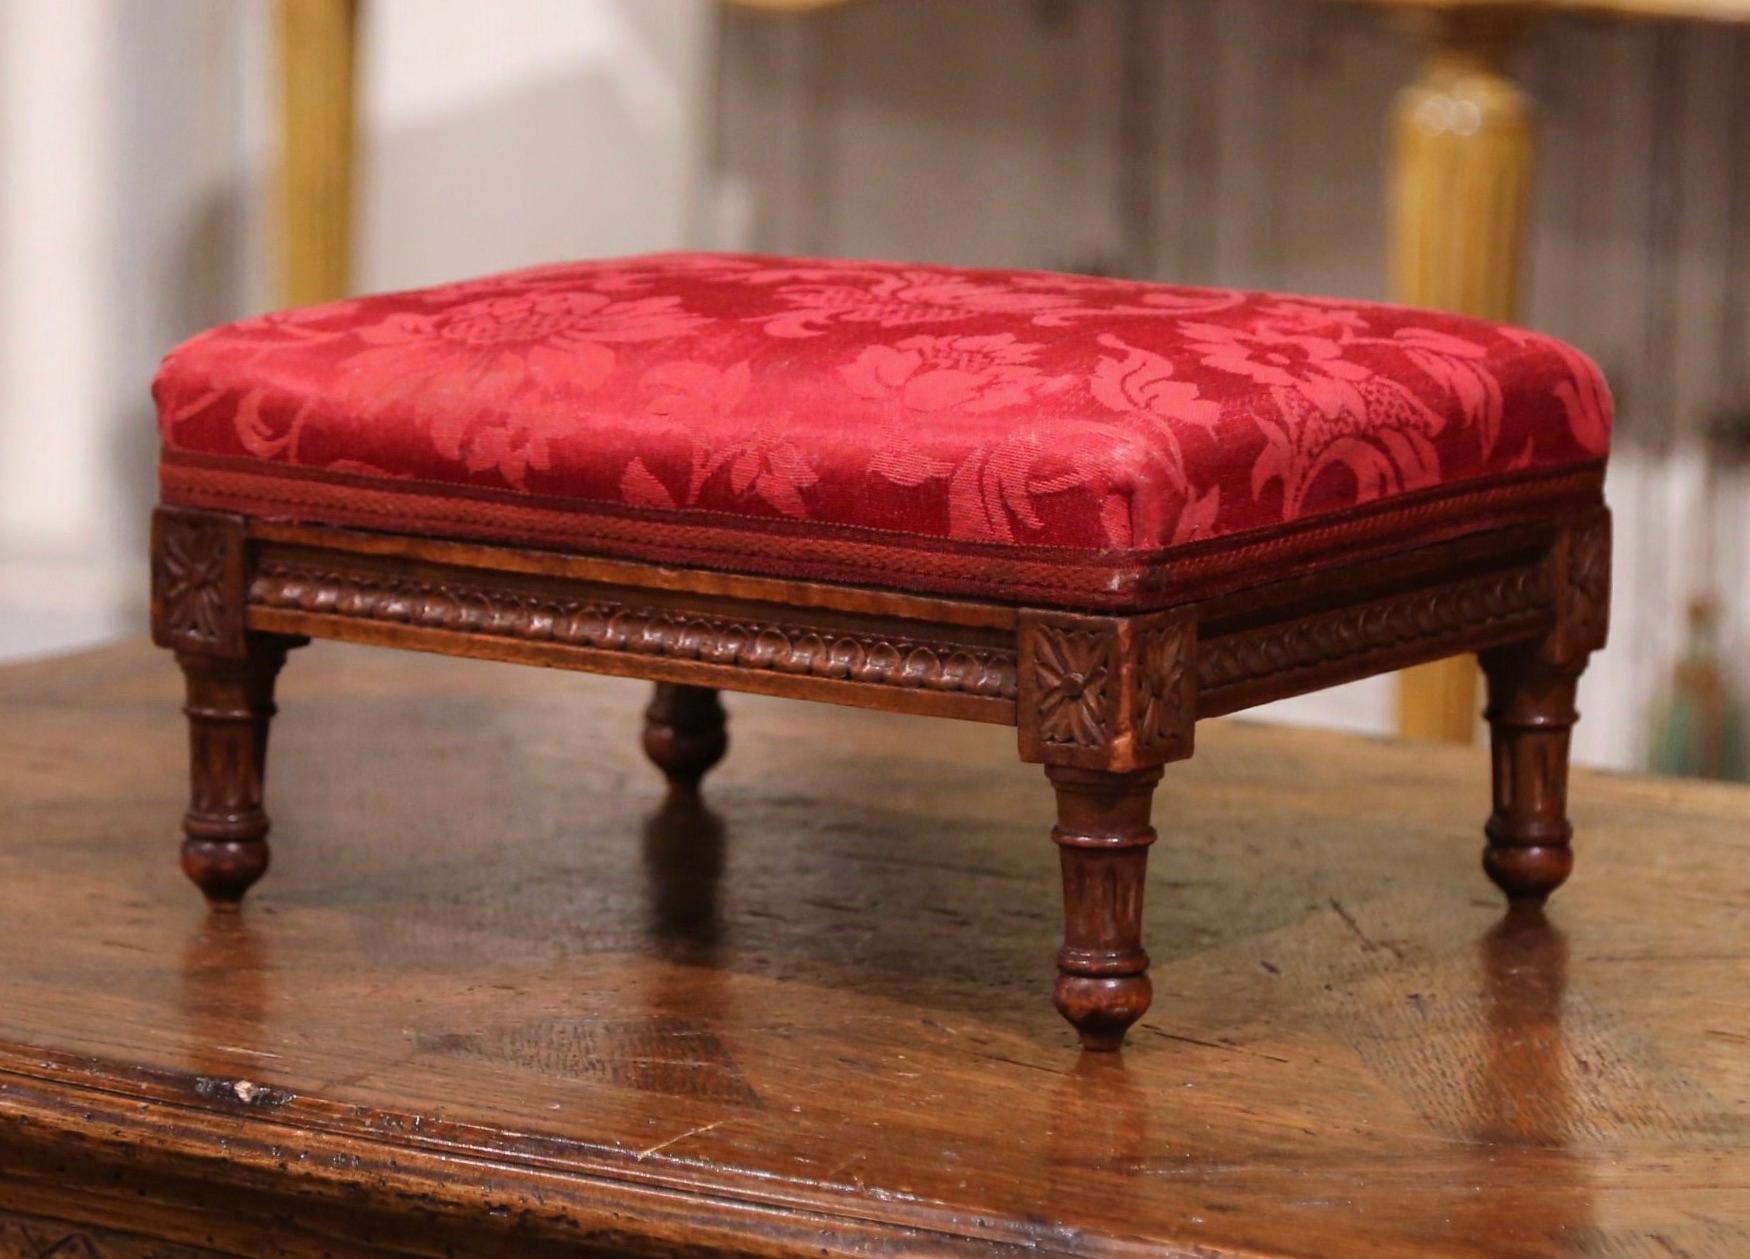 Hand-Carved Early 20th Century French Walnut Footstool with Floral Silk Fabric